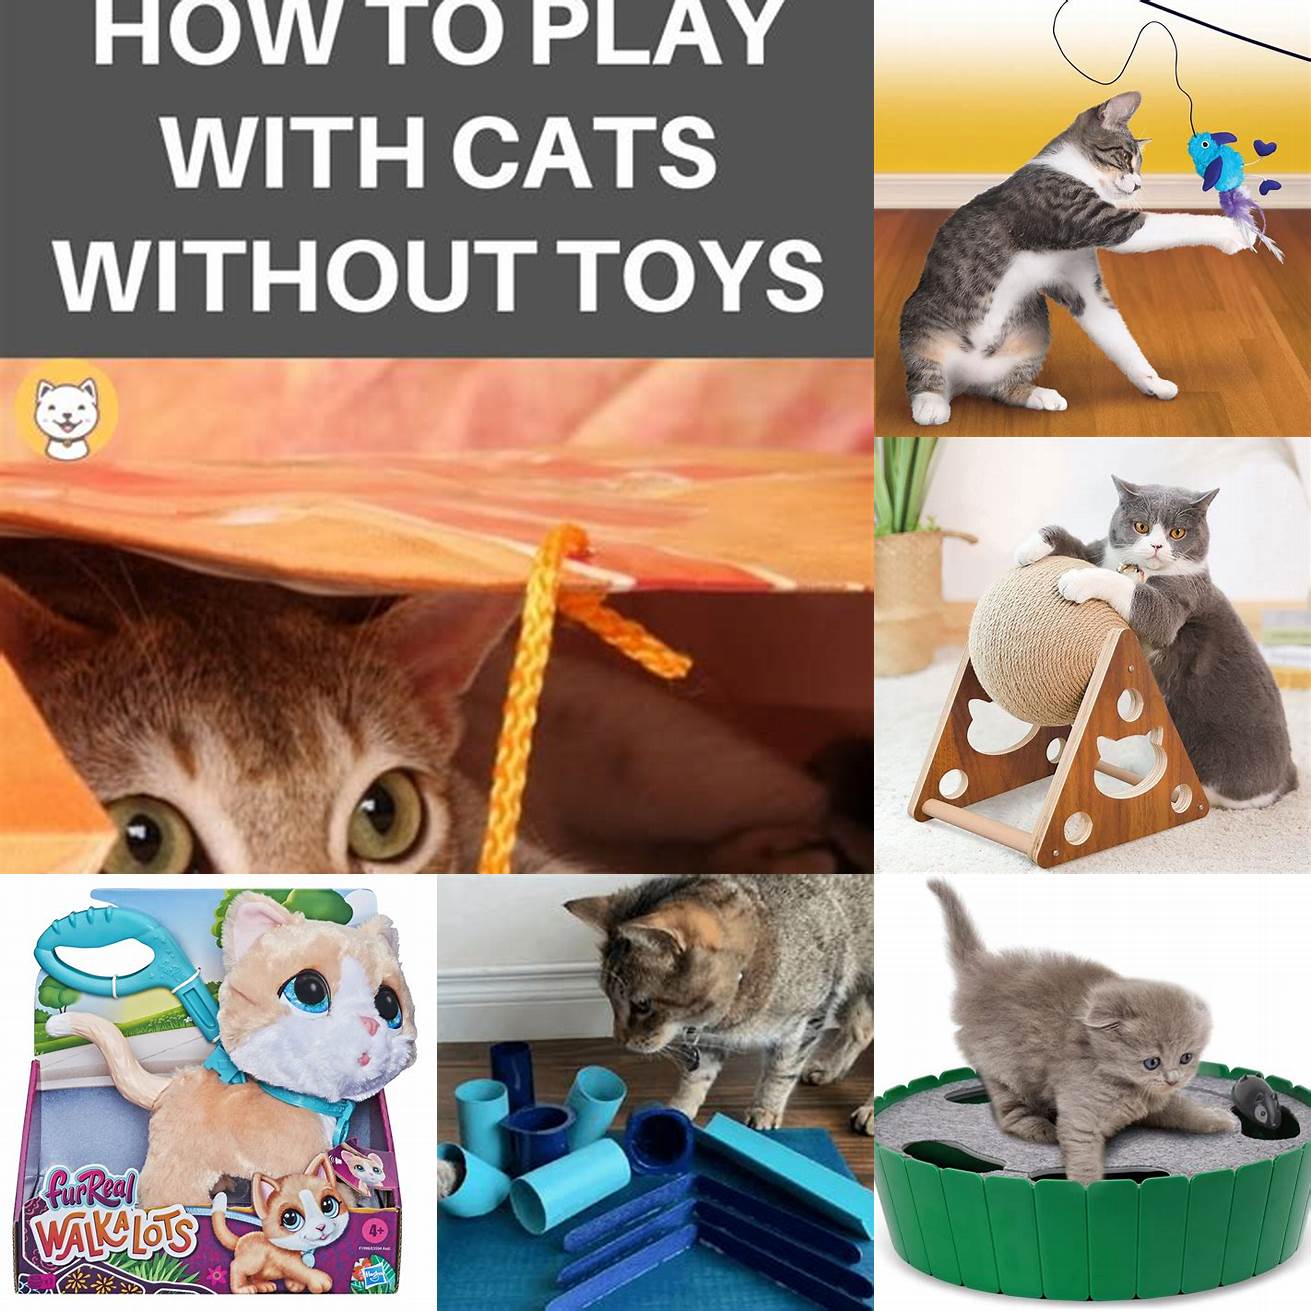 With or Without Toys